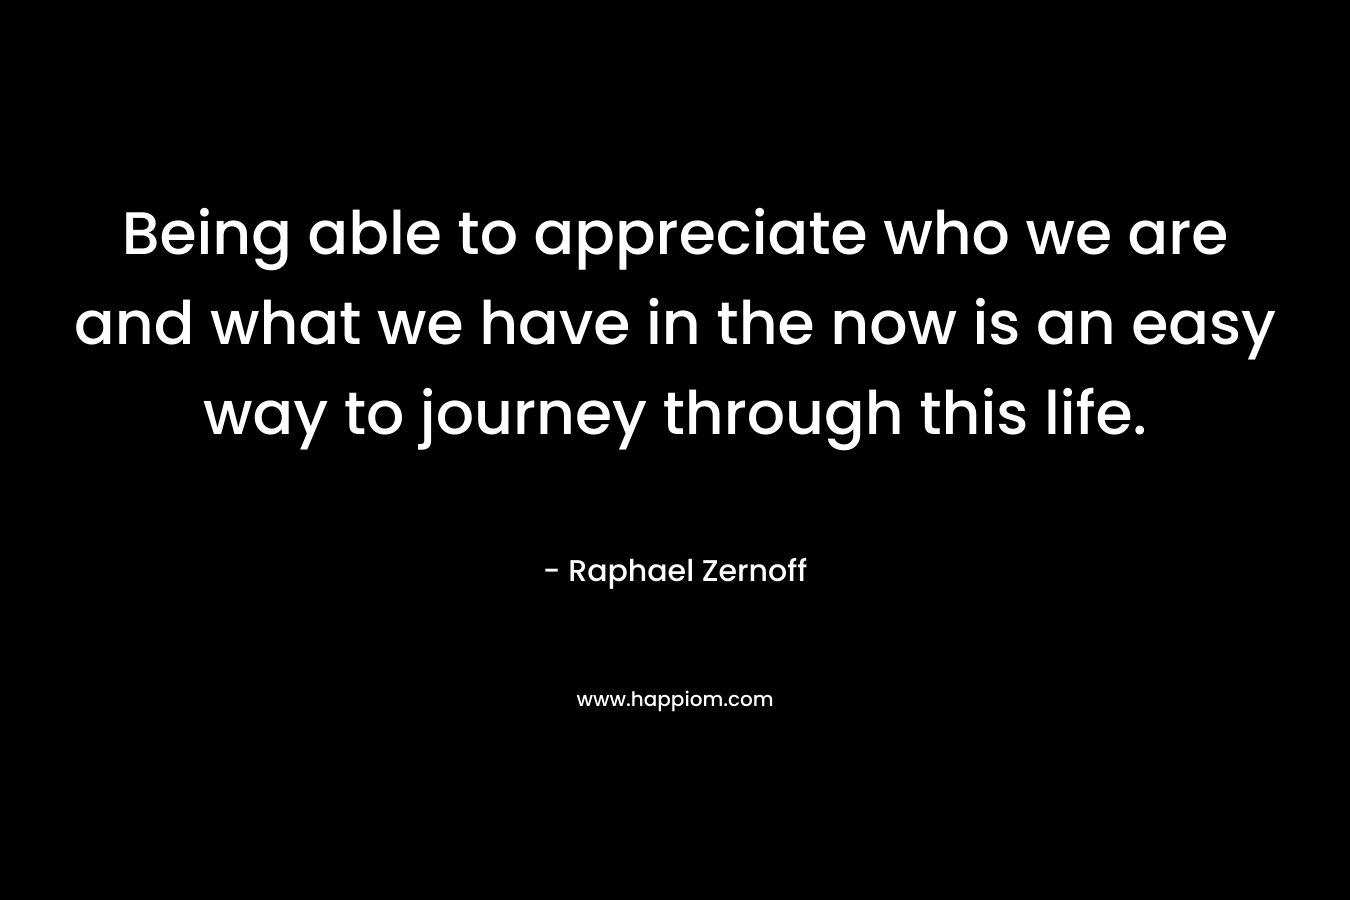 Being able to appreciate who we are and what we have in the now is an easy way to journey through this life.